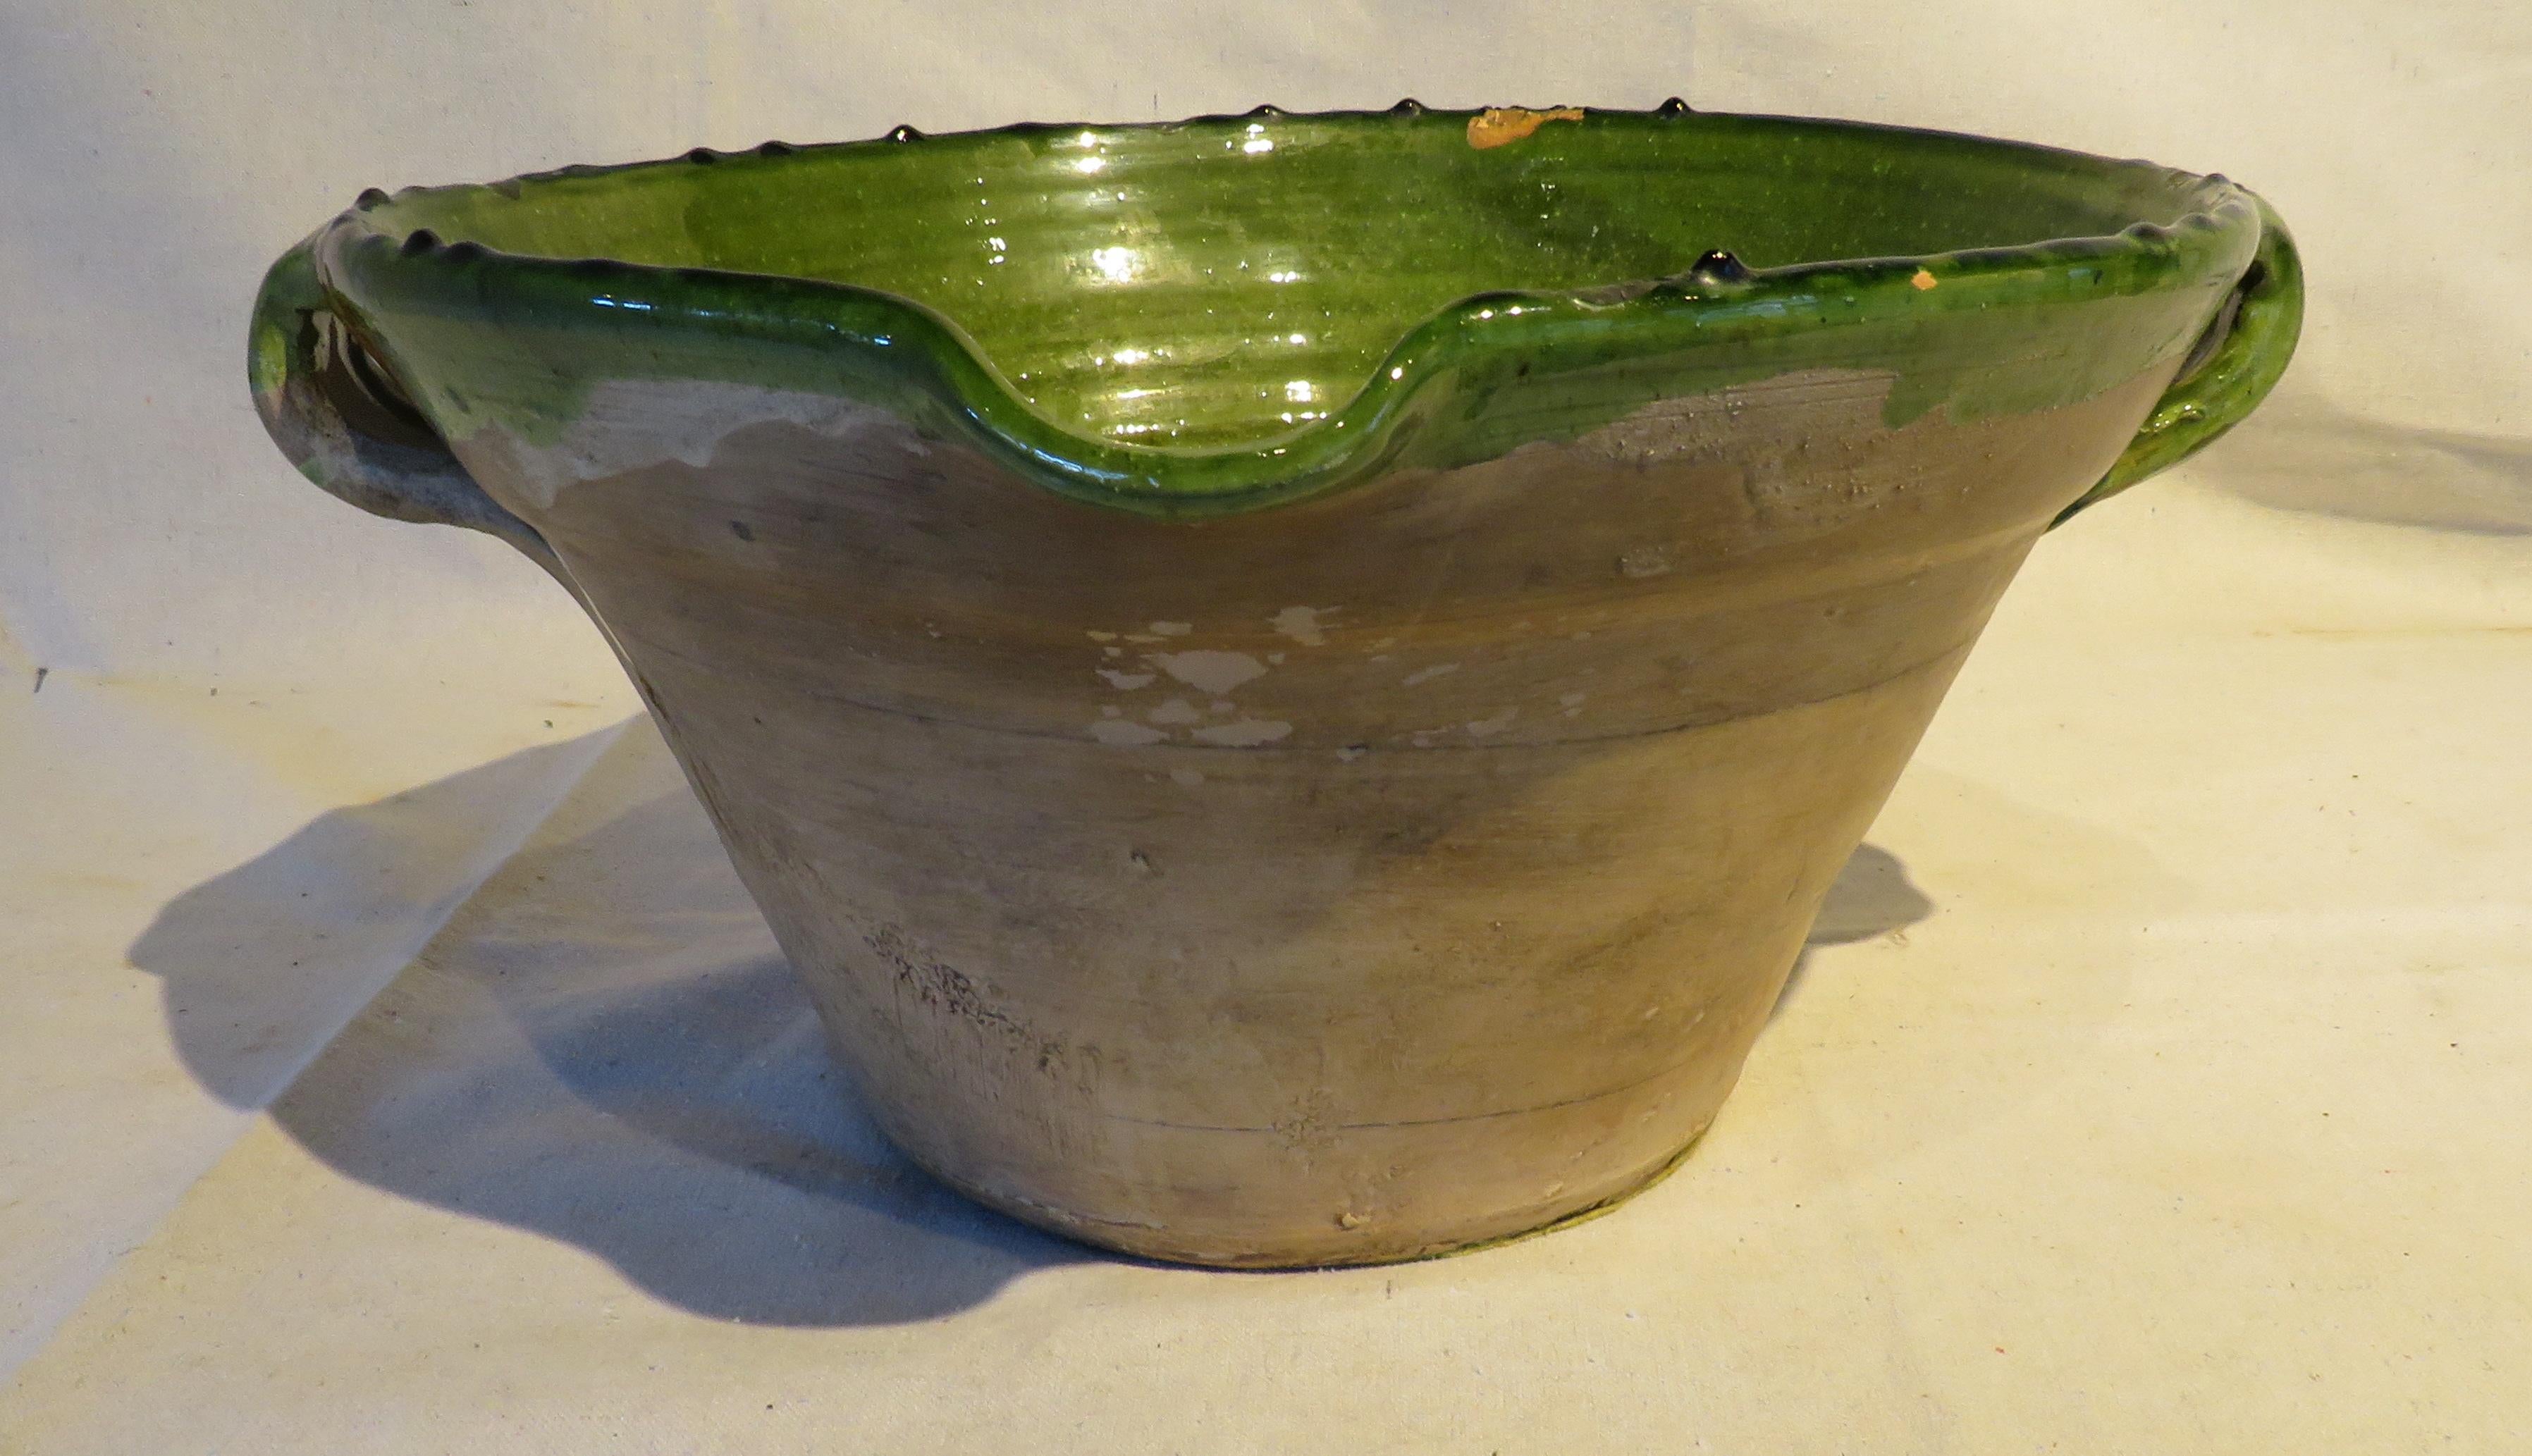 19th century French redware tian bowl with inside green glaze, serving spout, and natural finish on the exterior. 

Traditionally used to prepare confit in South West France, this type of bowl was also used to prepare other various foods from the